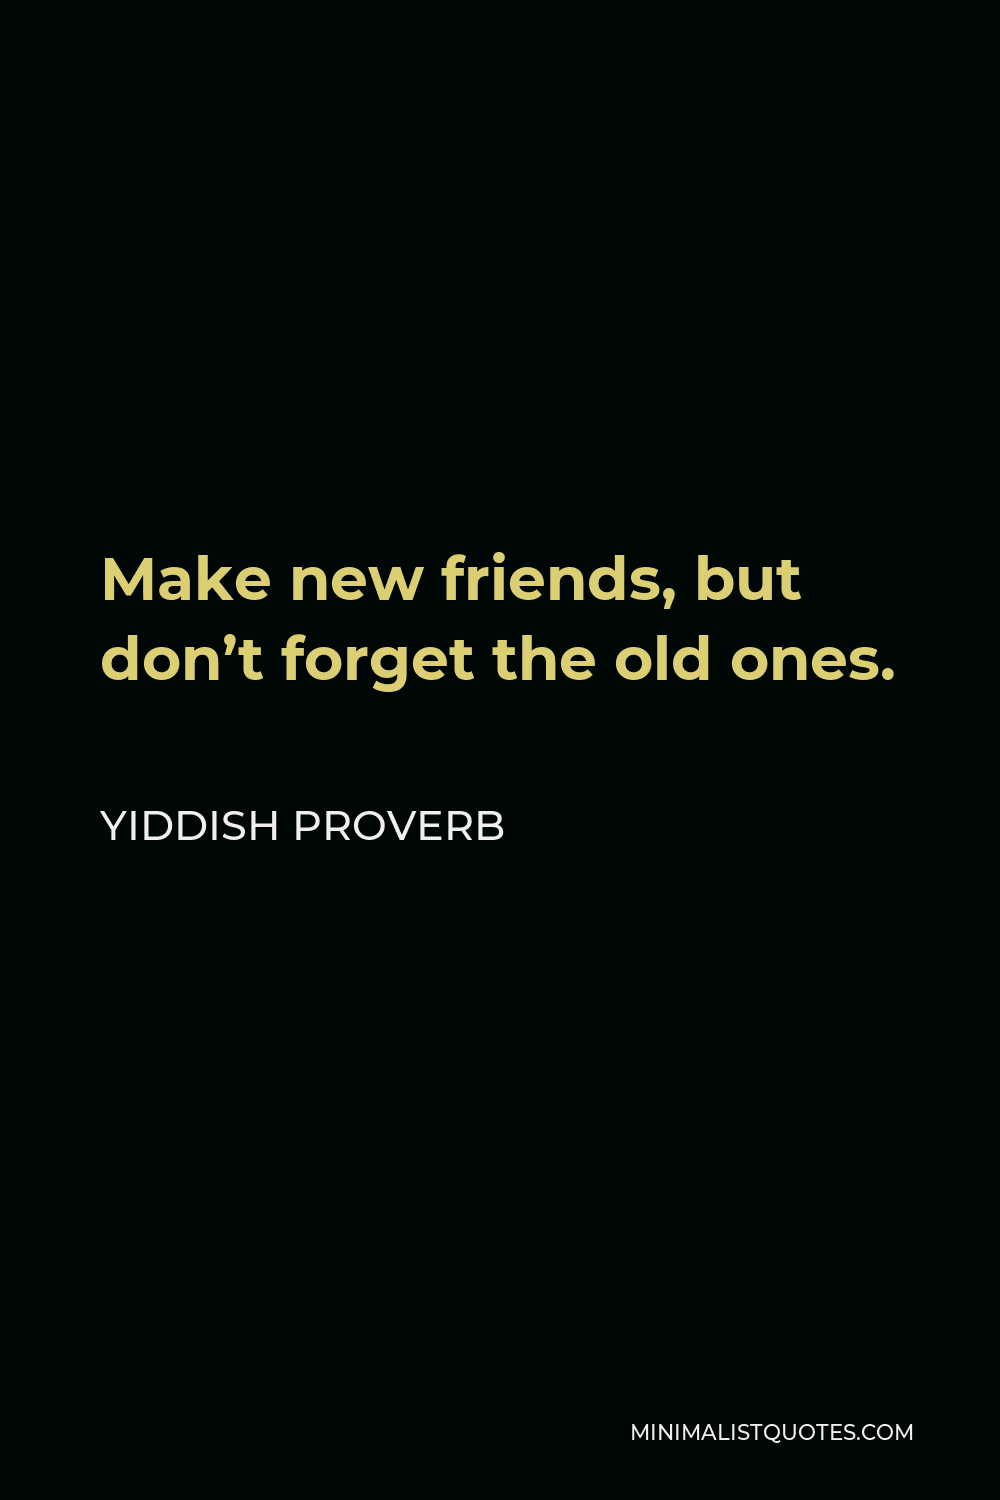 Yiddish Proverb Quote - Make new friends, but don’t forget the old ones.